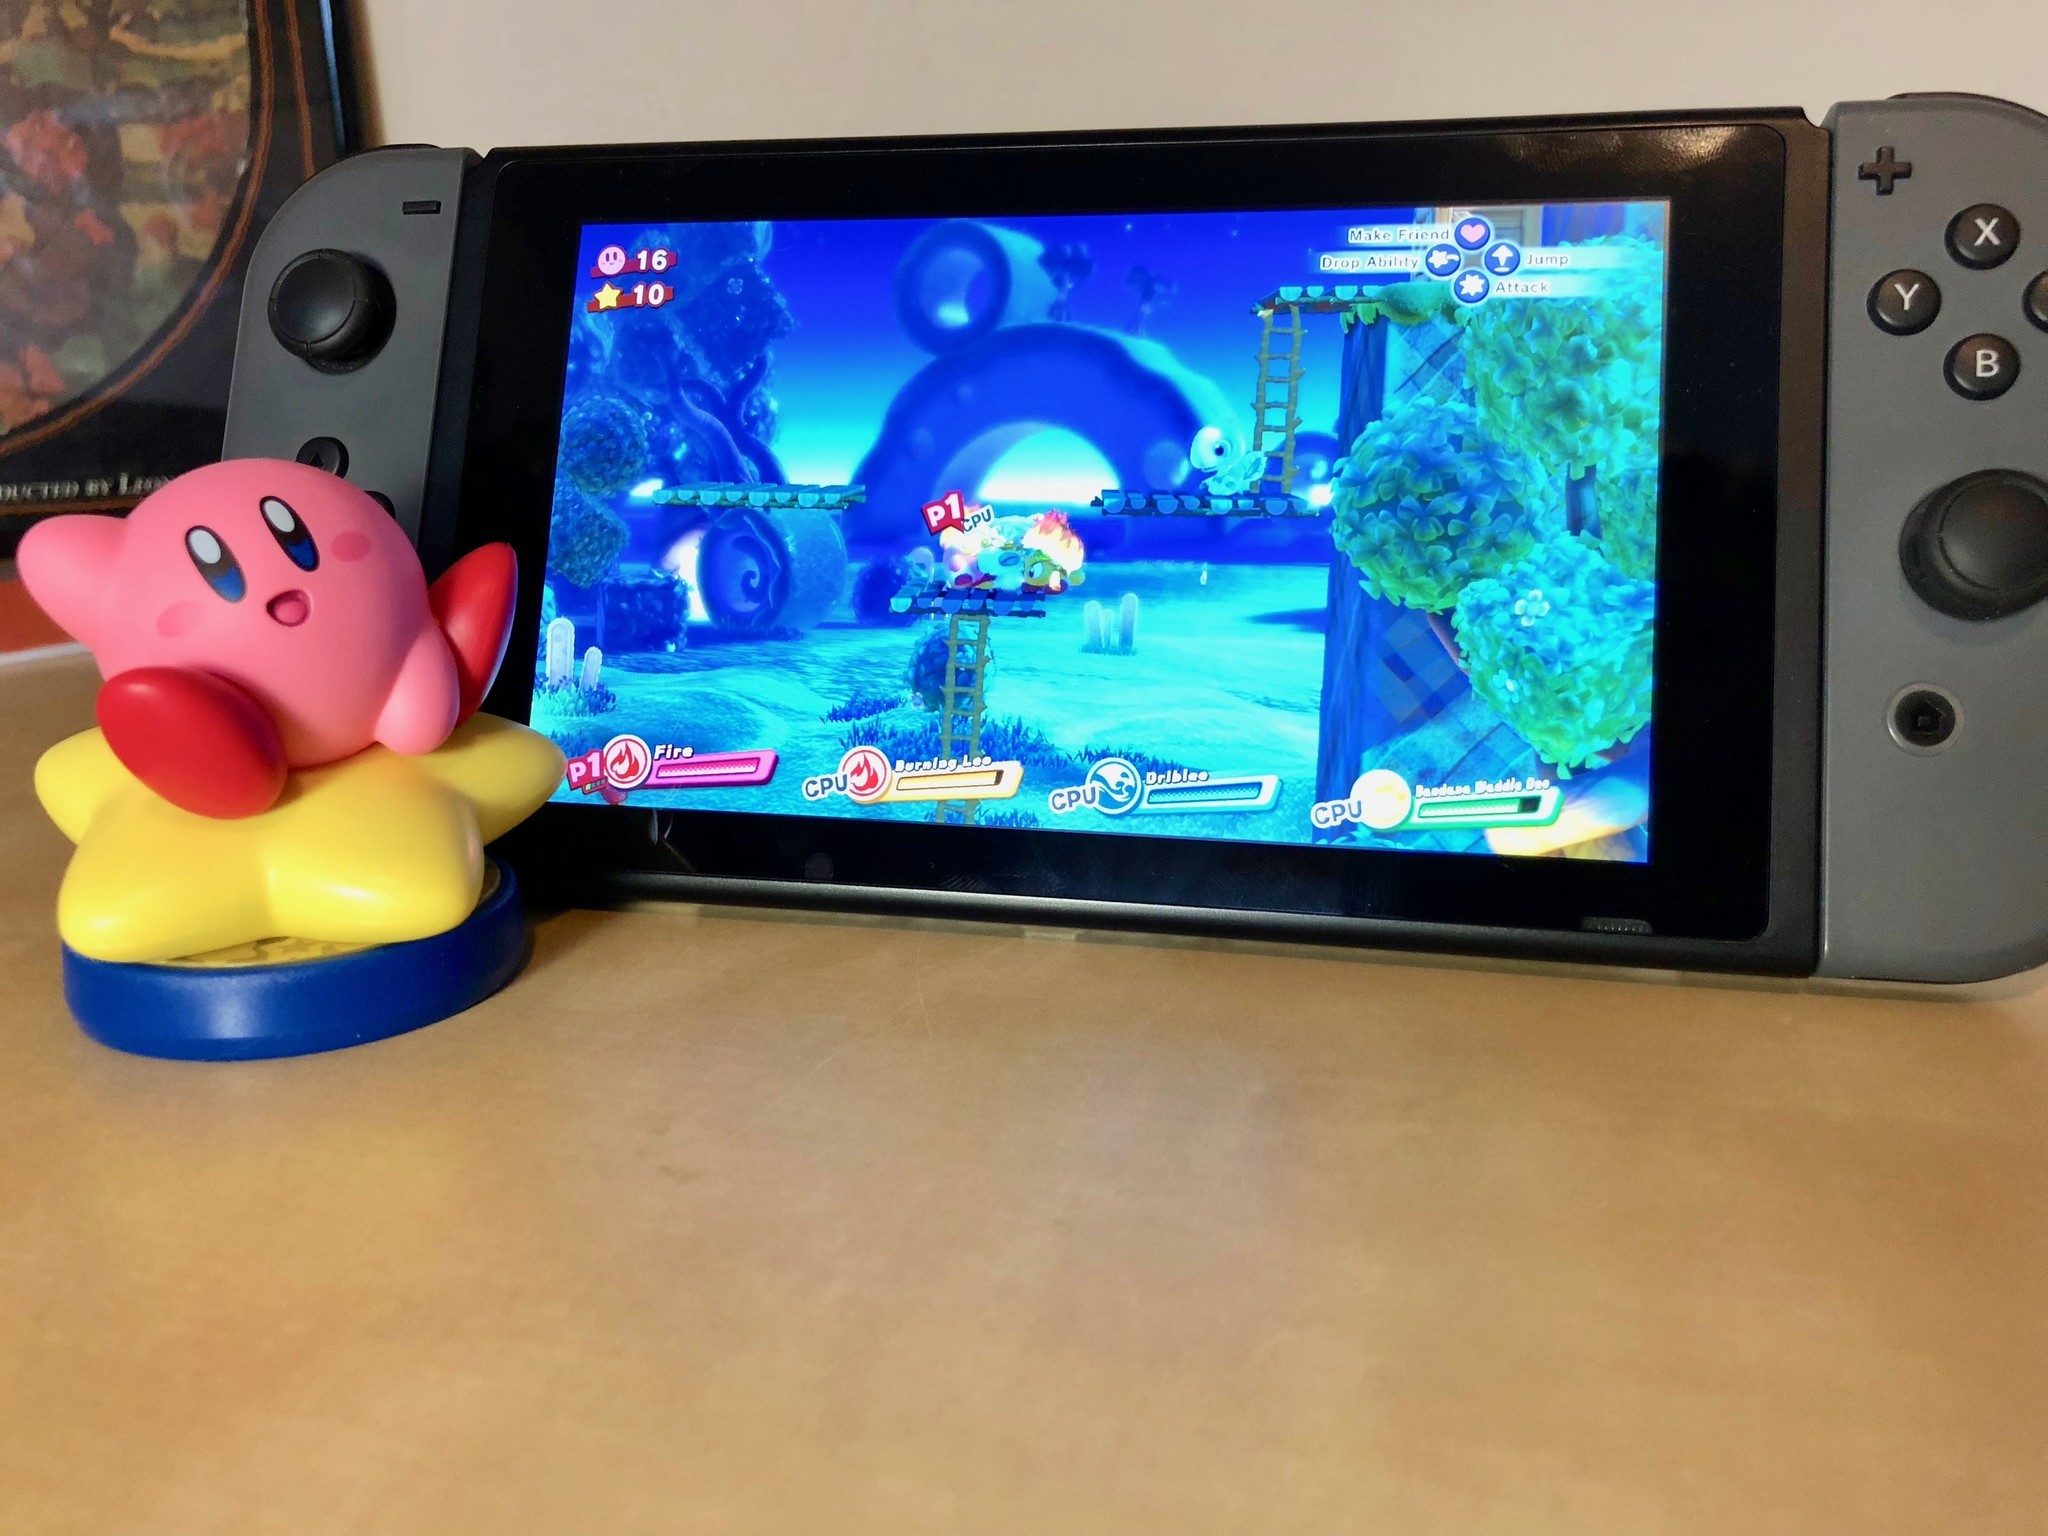 Kirby Star Allies Game, Nintendo Switch, Wiki, DLC, Gameplay, ,  Cheats, Tips, Guide Unofficial